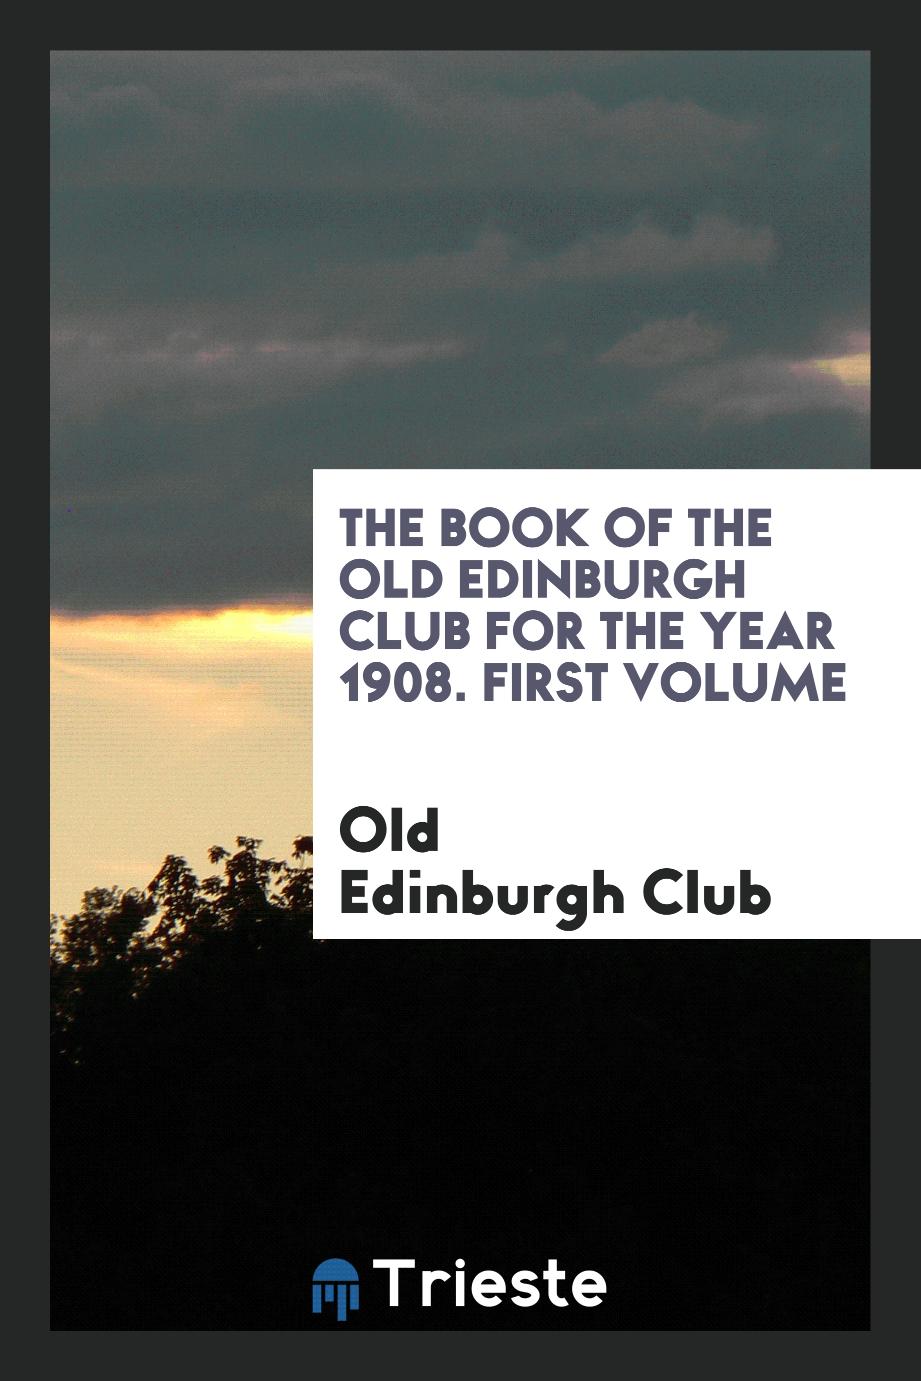 The Book of the Old Edinburgh Club for the Year 1908. First Volume